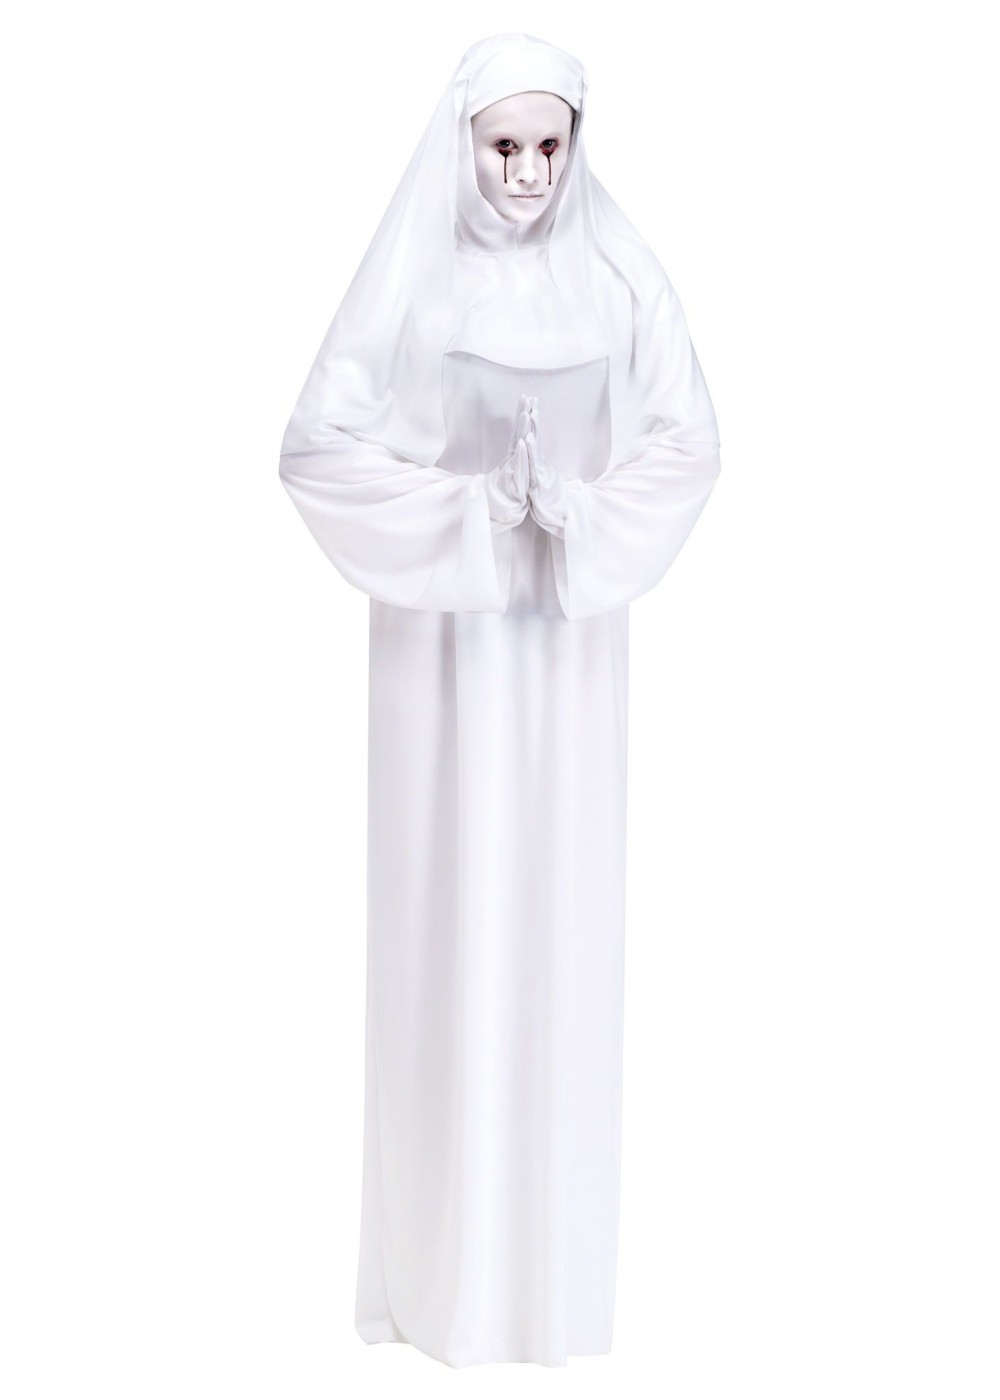 Sister Scary Plus Size Women Costume